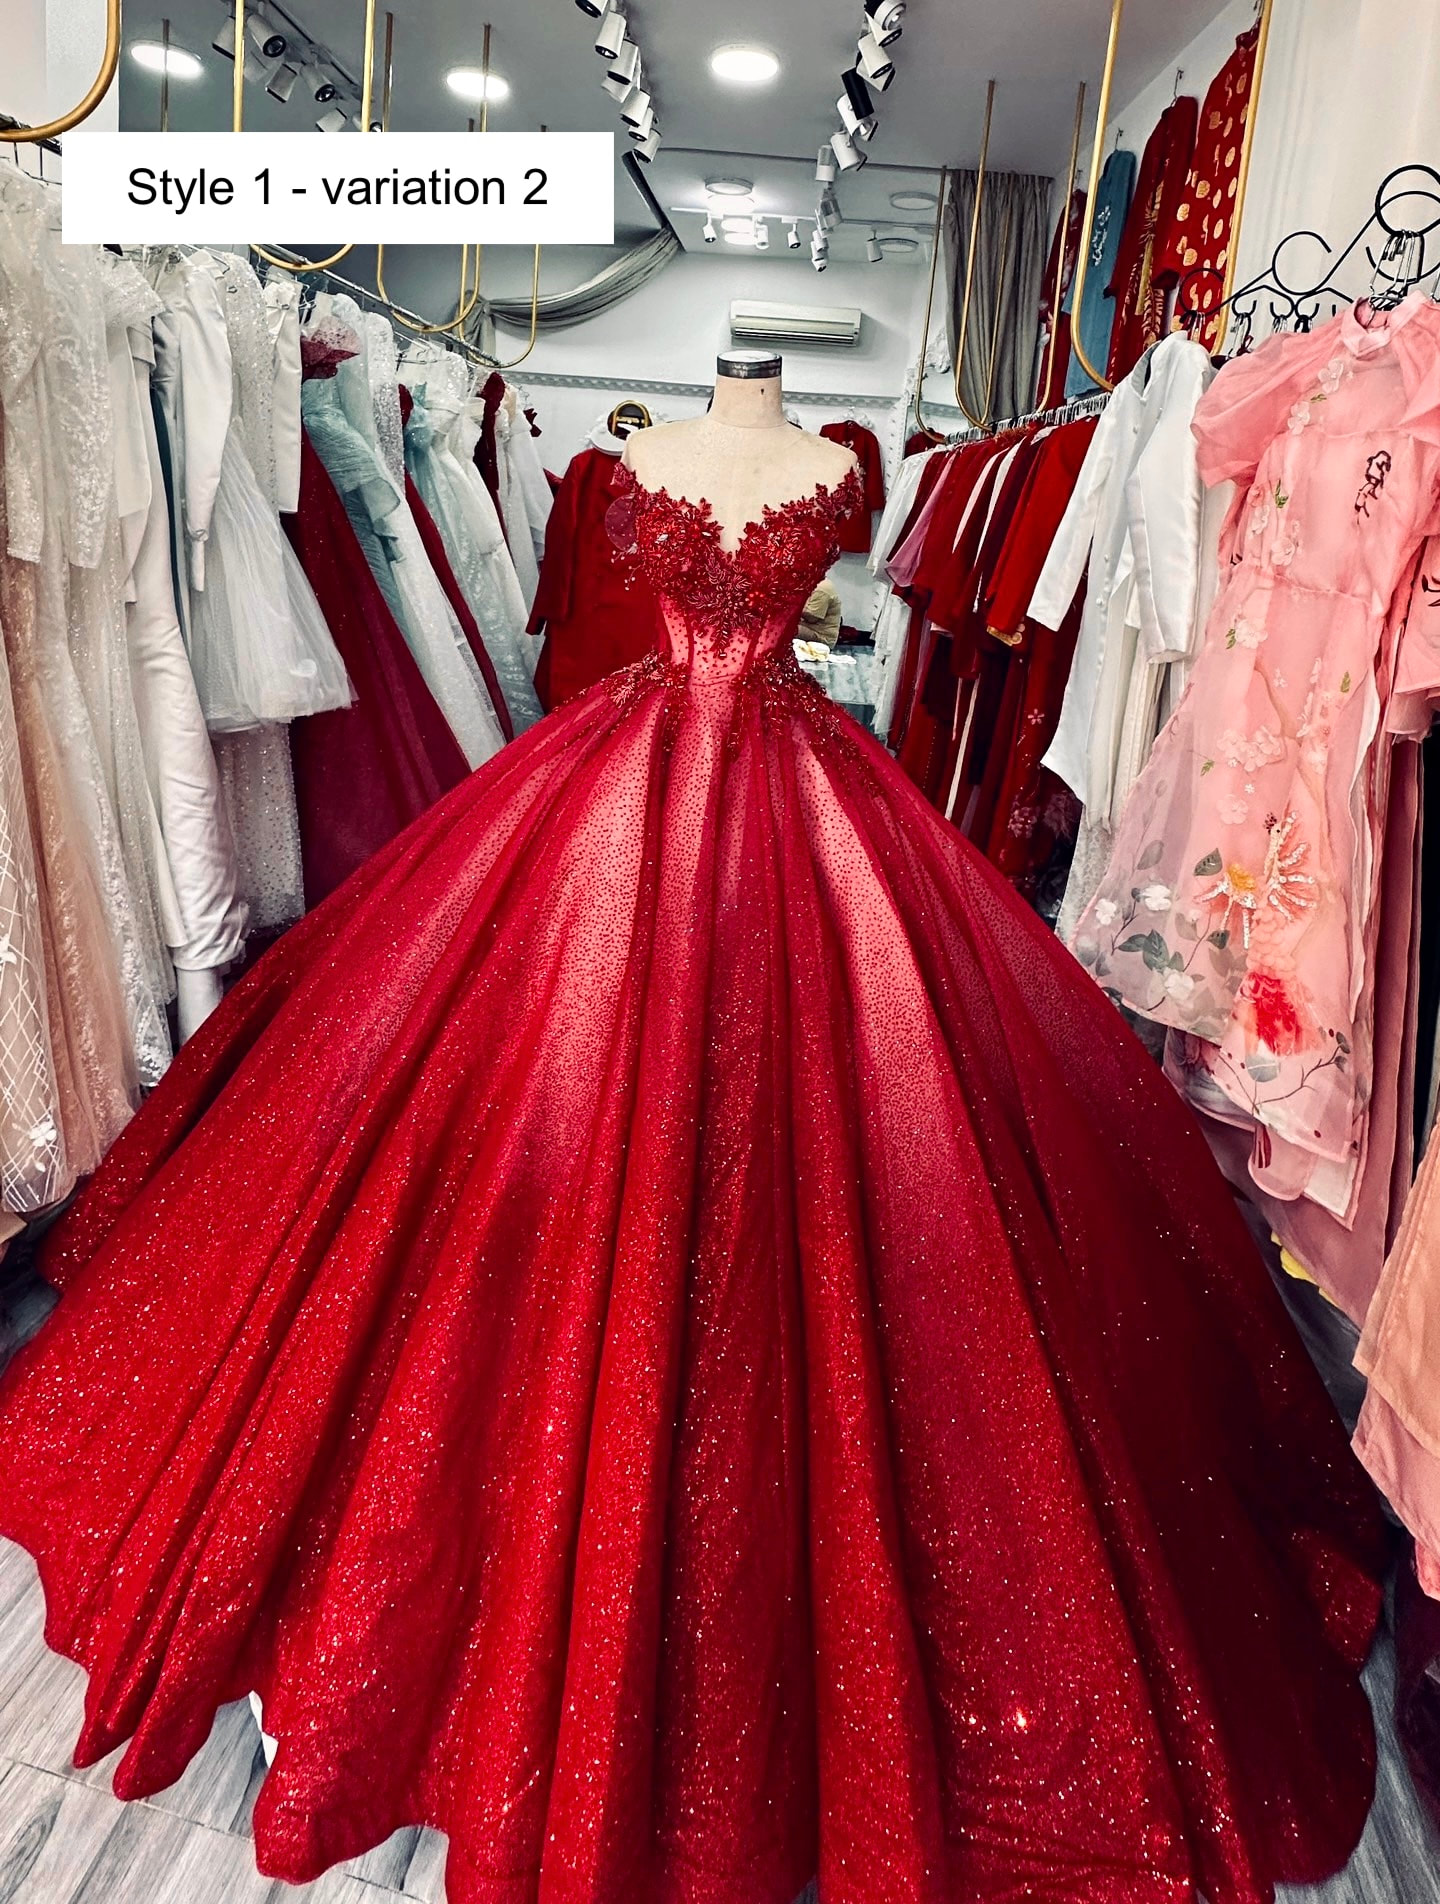 Cherry red lace applique long sleeves illusion V neck ball gown wedding  dress with chapel train - various styles